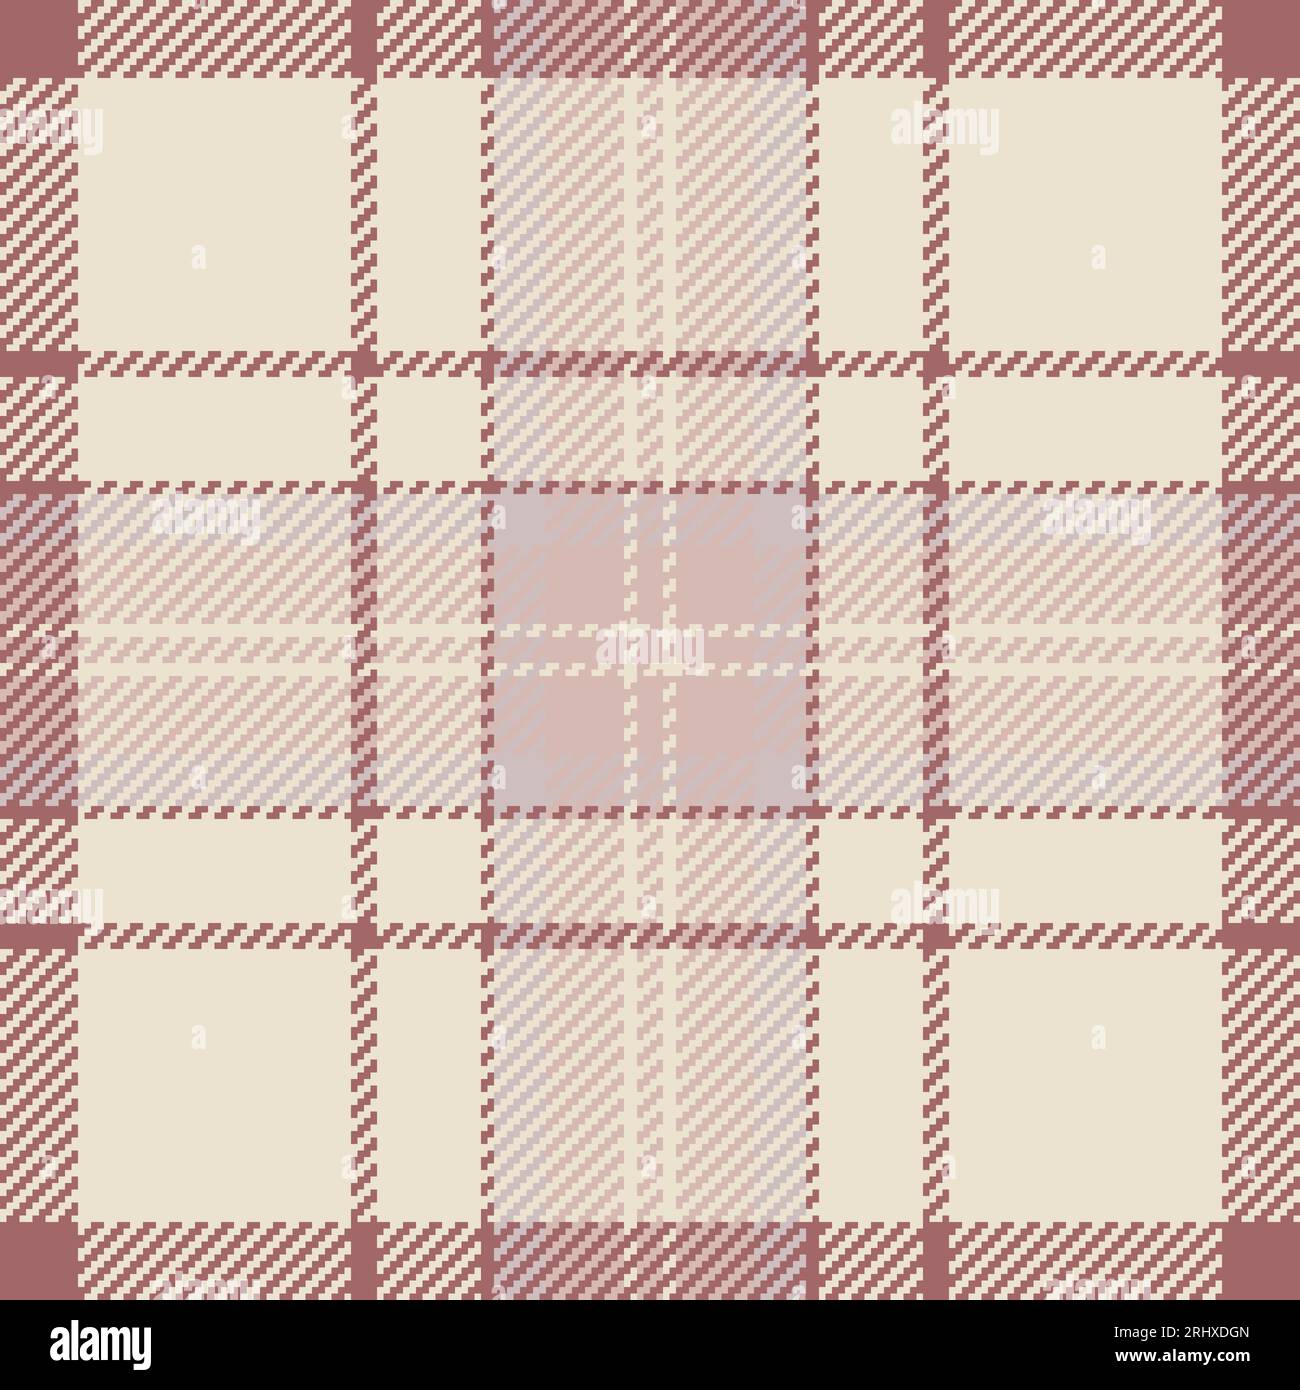 Pattern vector tartan of textile plaid background with a seamless check texture fabric in light and red colors. Stock Vector